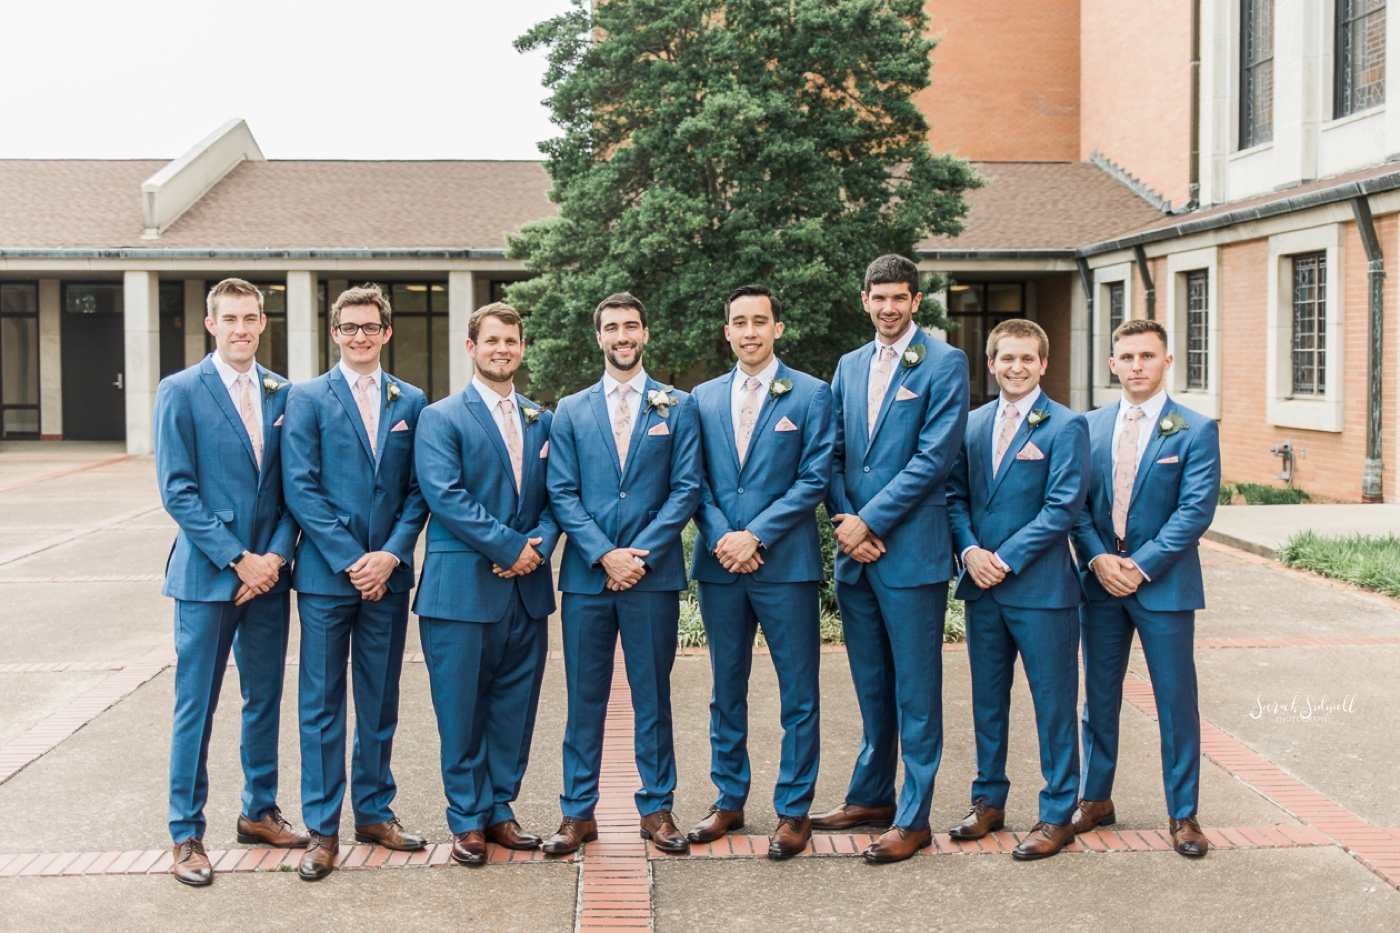 Groomsmen in blue suits stand in a line together. 